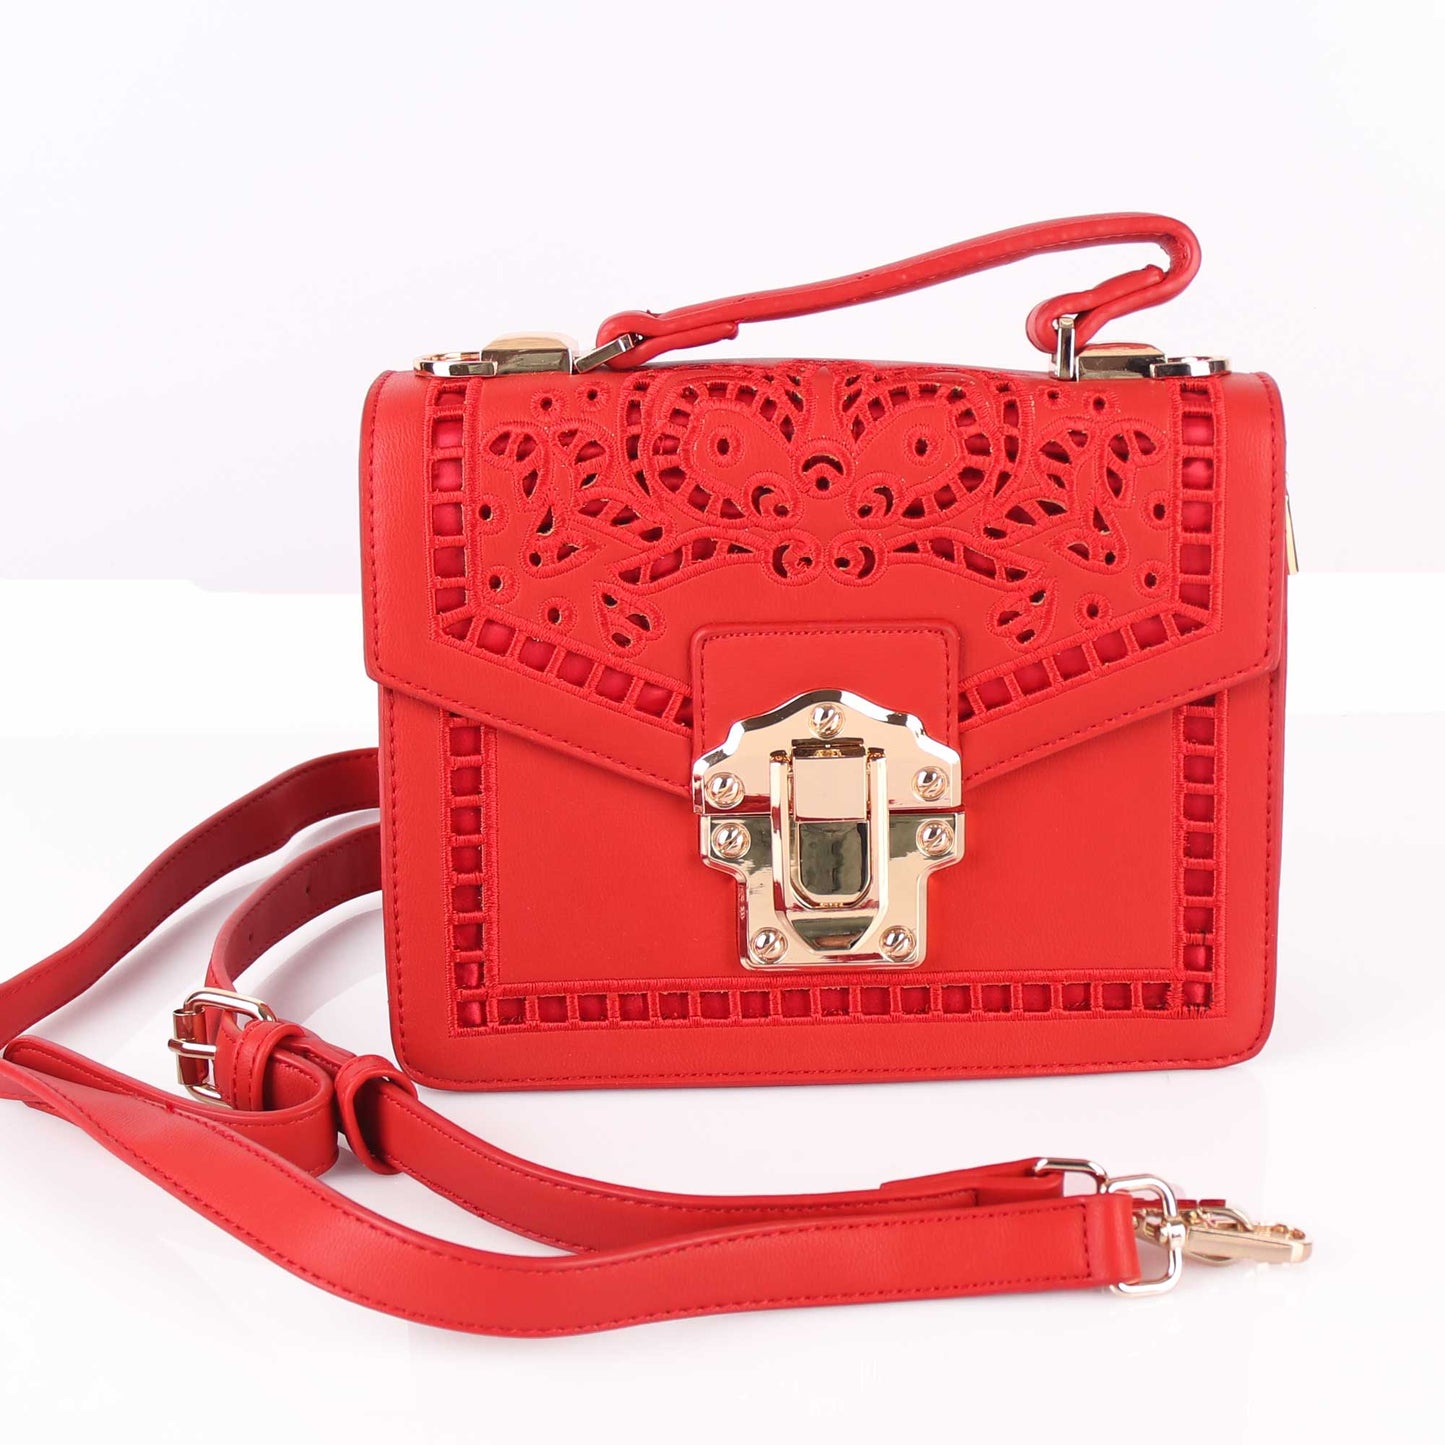 The Punched Sling Bag in Red